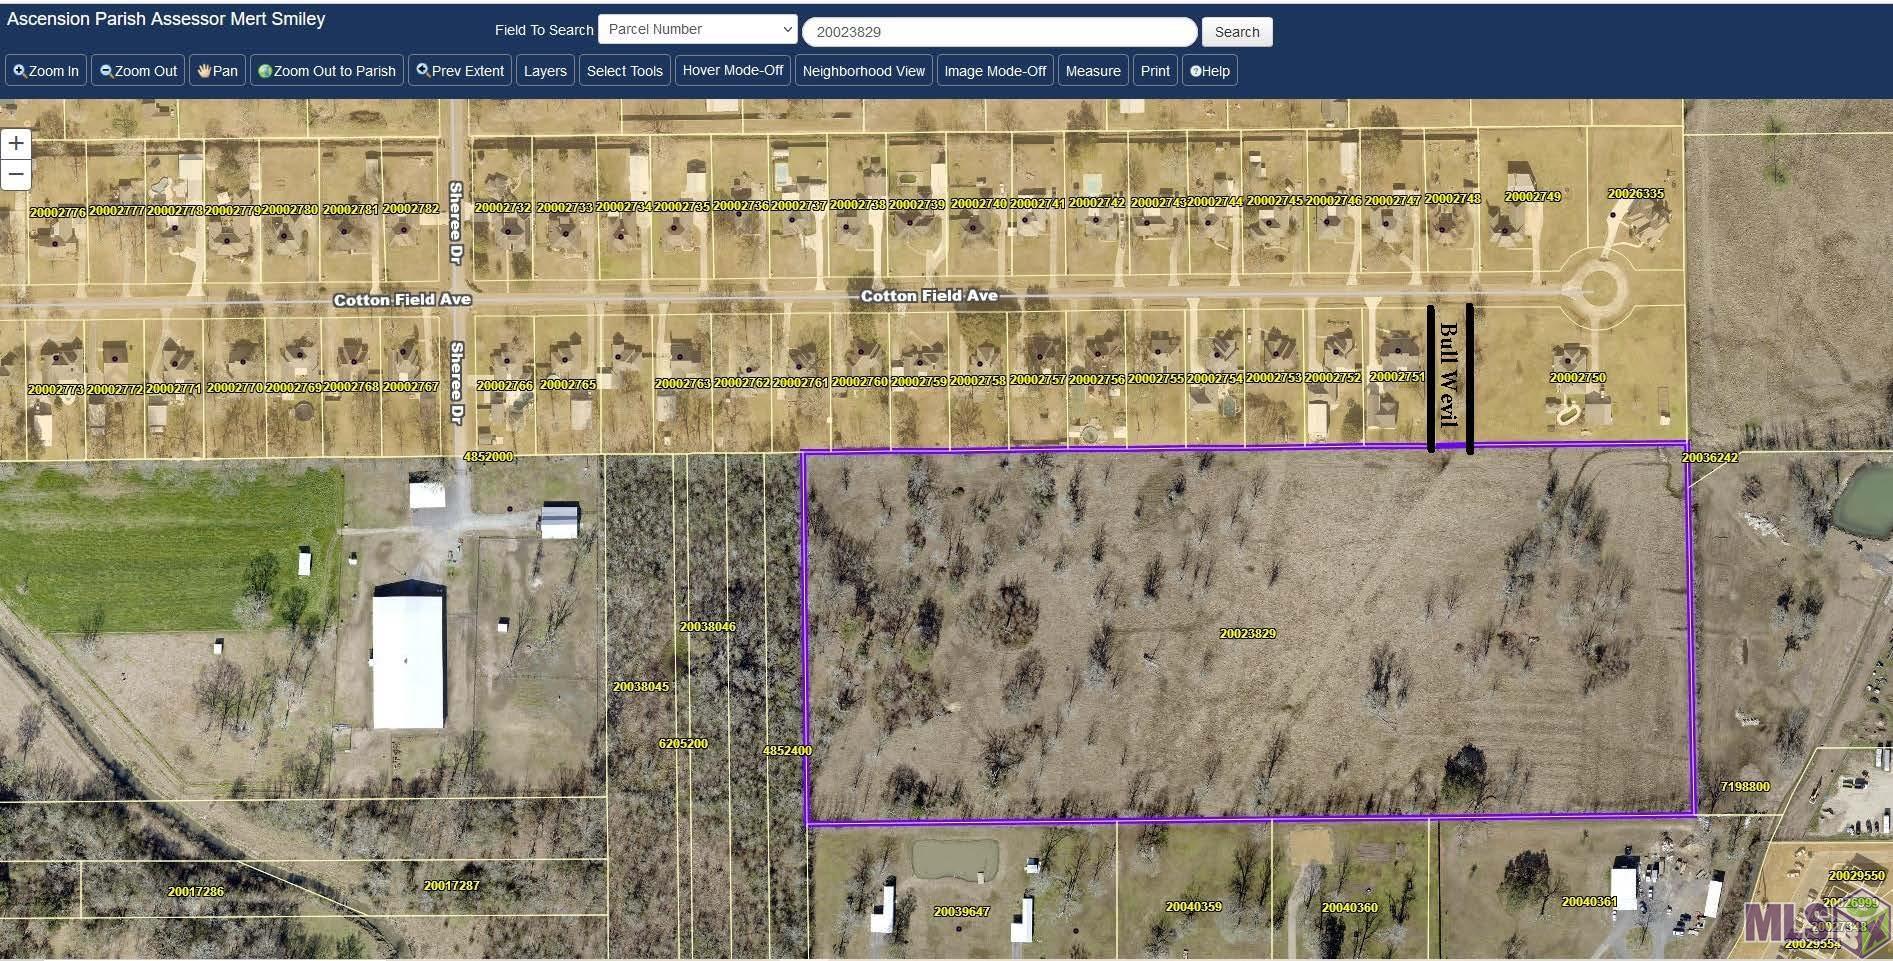 Prime development opportunity located in Gonzales off of Bull Wevil Dr. Enter through Cotton Field Subdivision to see this beautifully cleared 21.85 acres with scattered trees throughout.*Lot dimensions not warranted by Realtor*